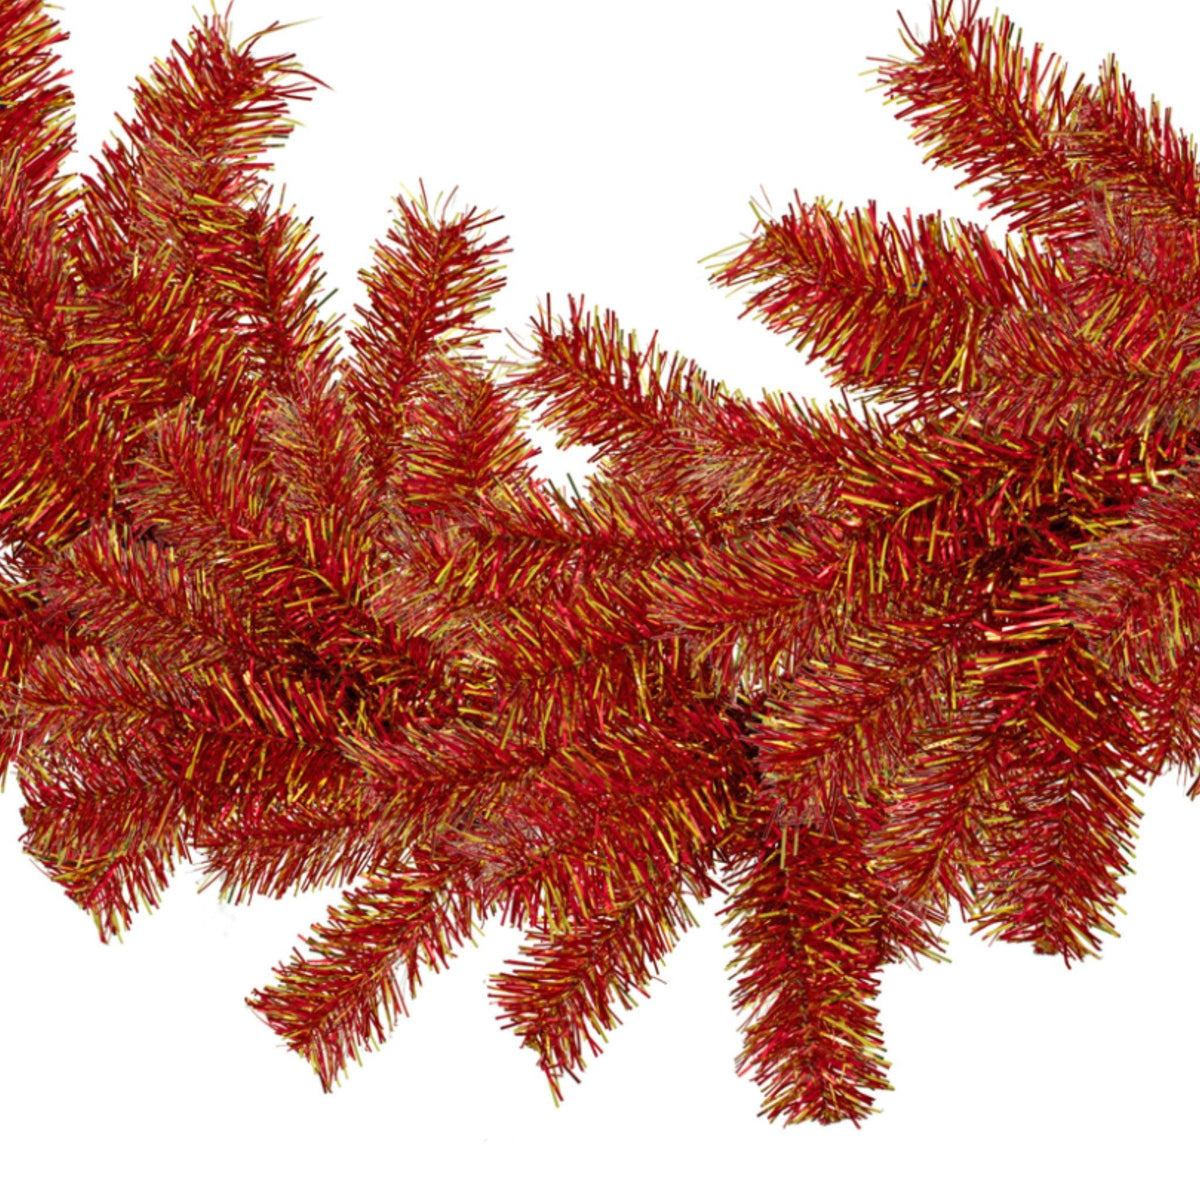 Shop for Lee Display's brand new 6FT Shiny Metallic Red and Gold Tinsel Brush Garlands on sale now at leedisplay.com.  Middle